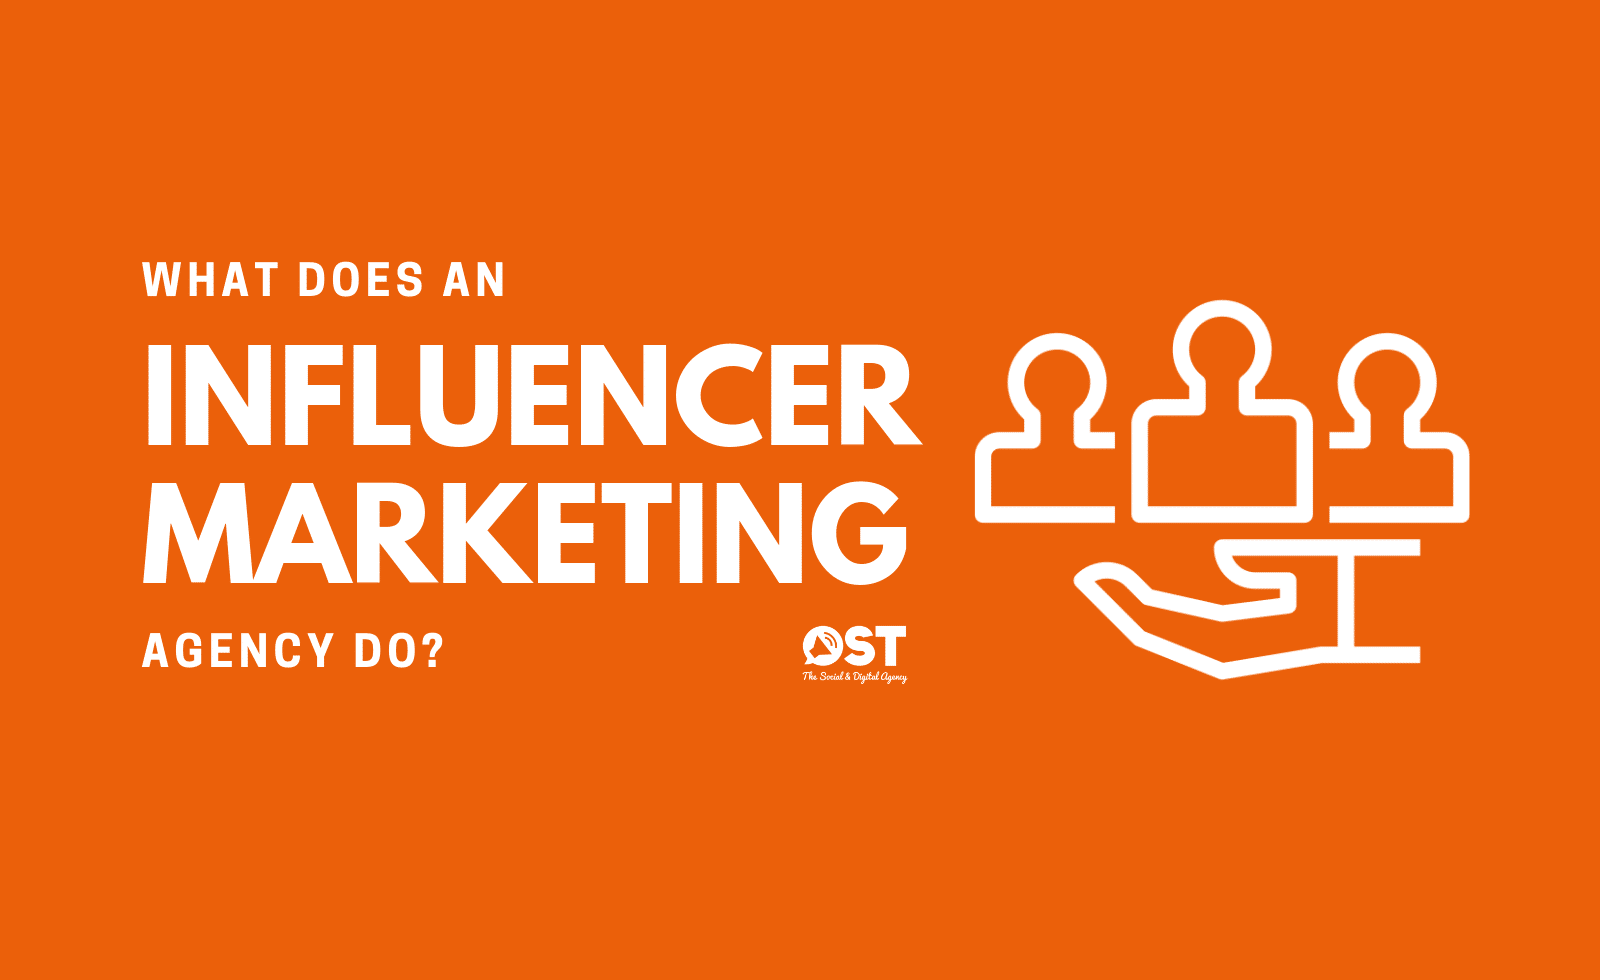 What Does an Influencer Marketing Agency Do?